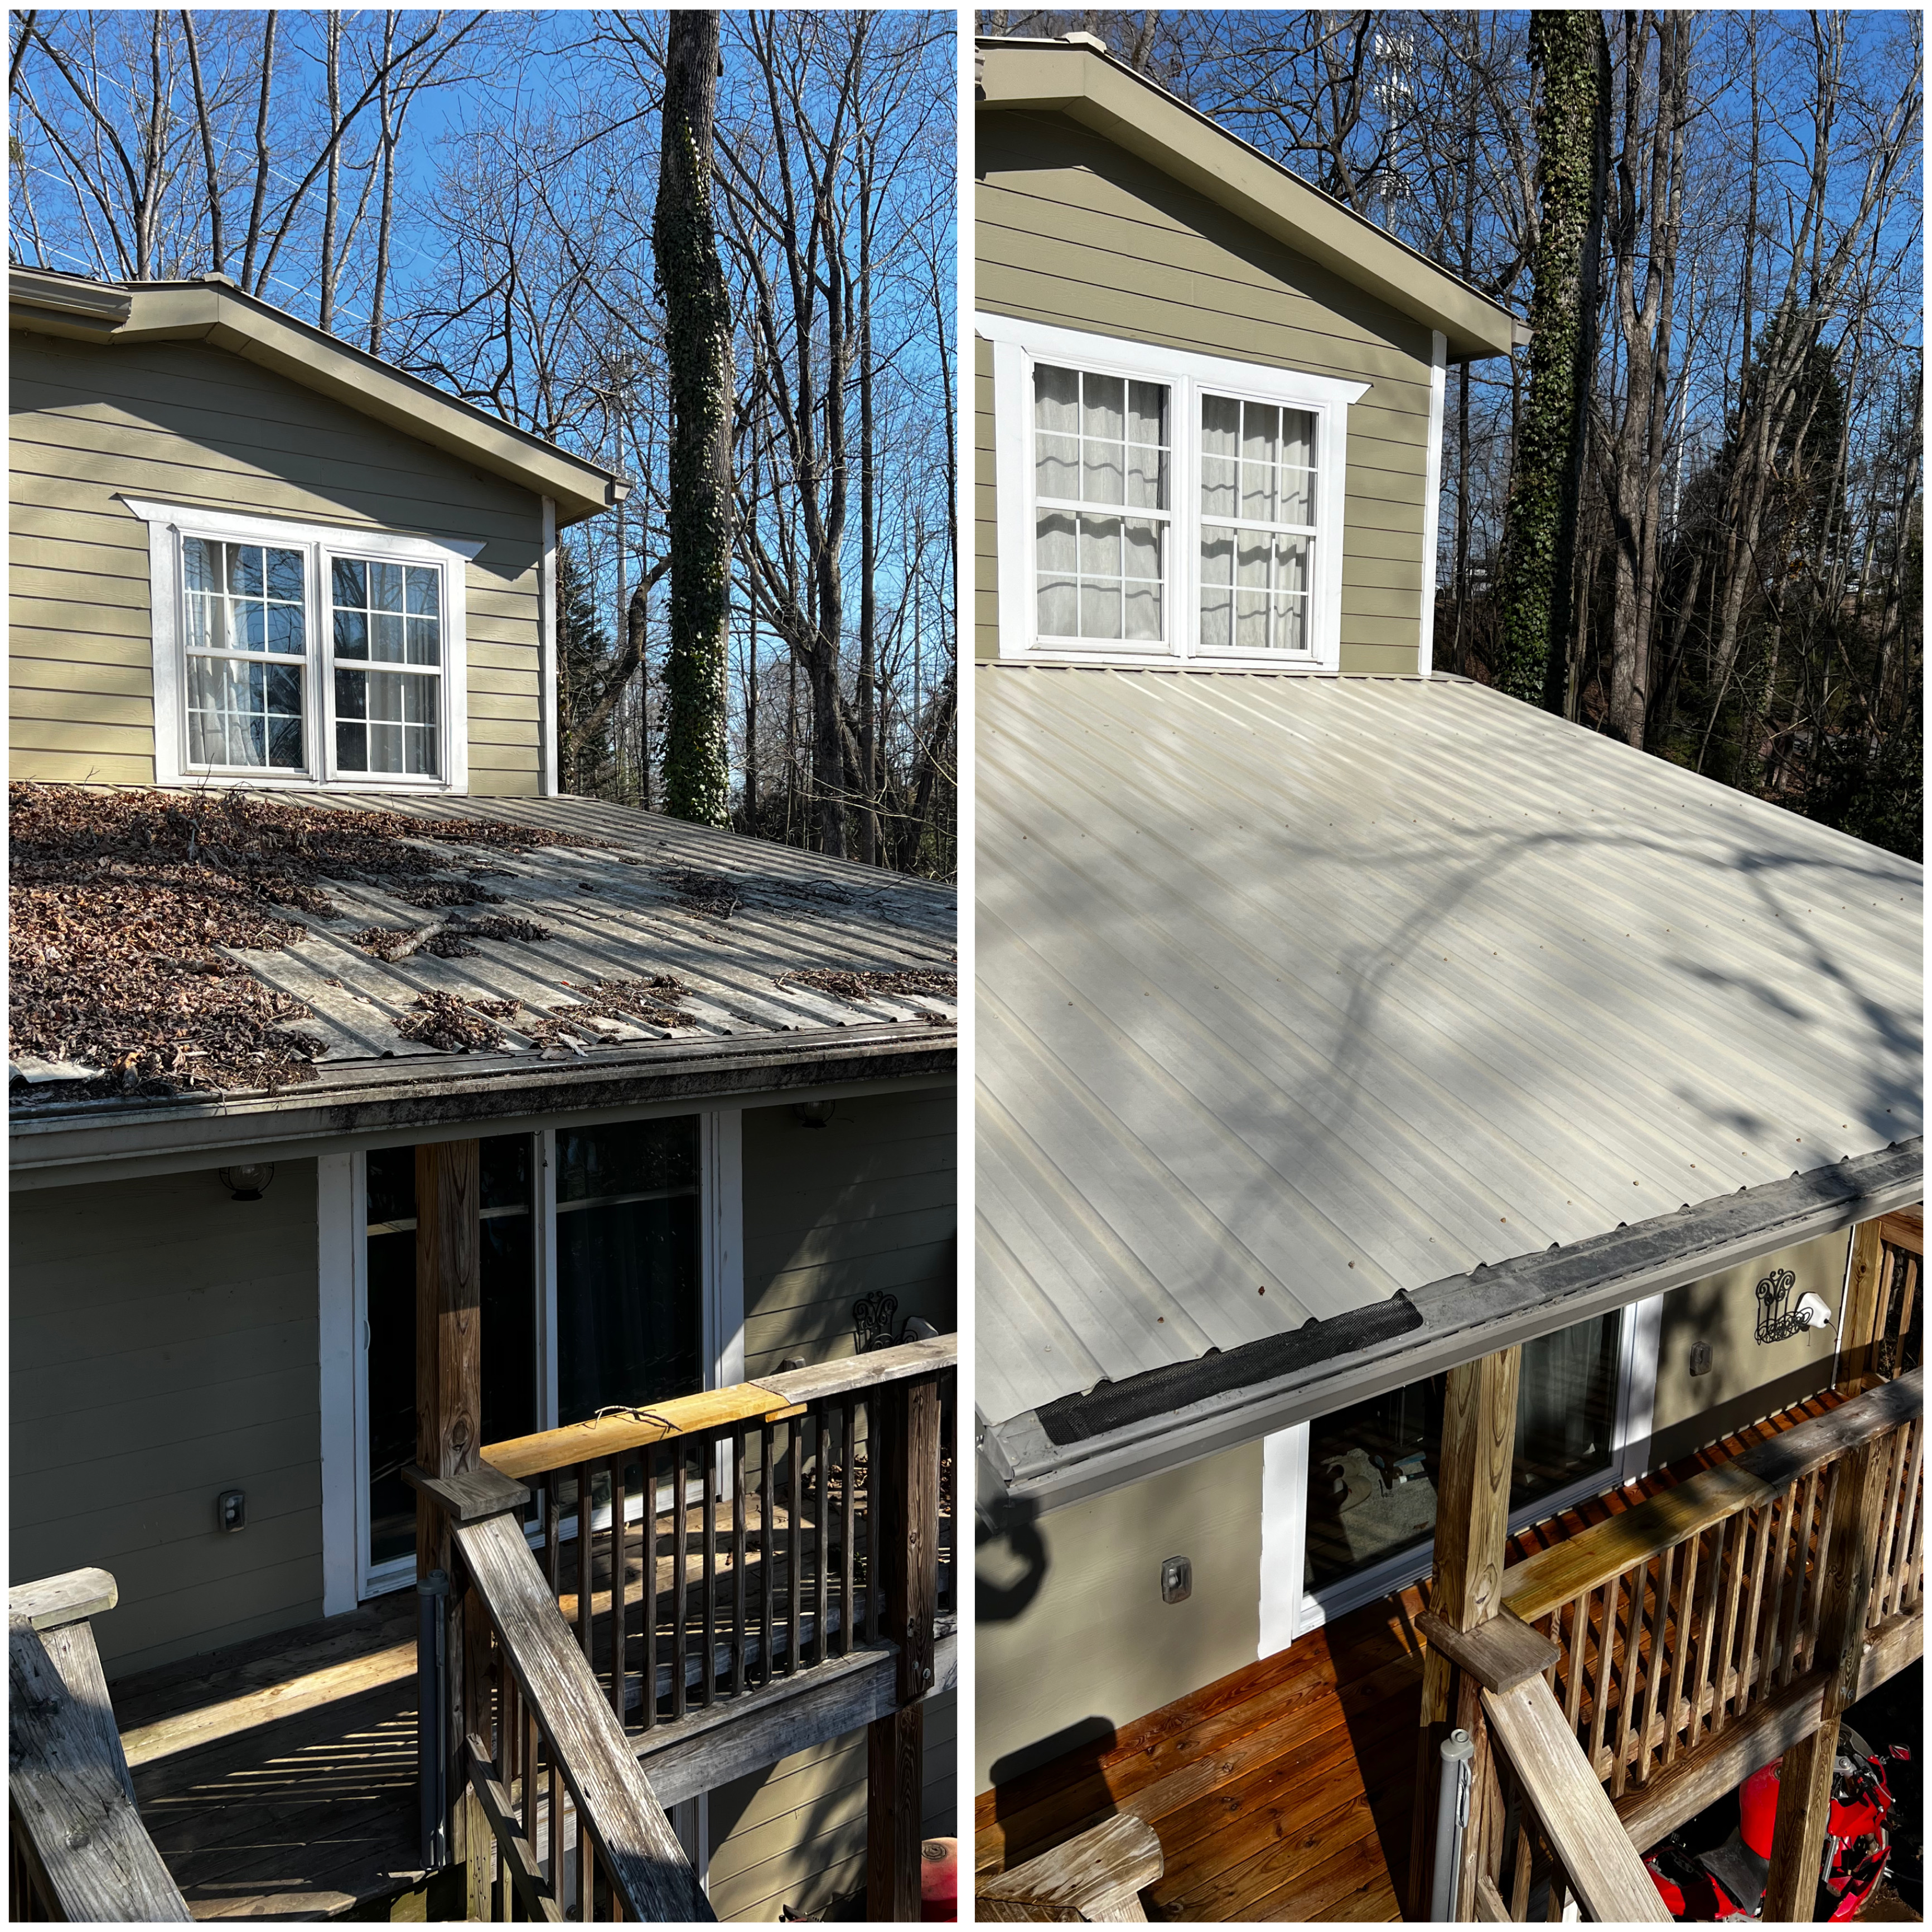 Roof wash and house wash for renovations in Gainesville, Ga on Lake Lanier